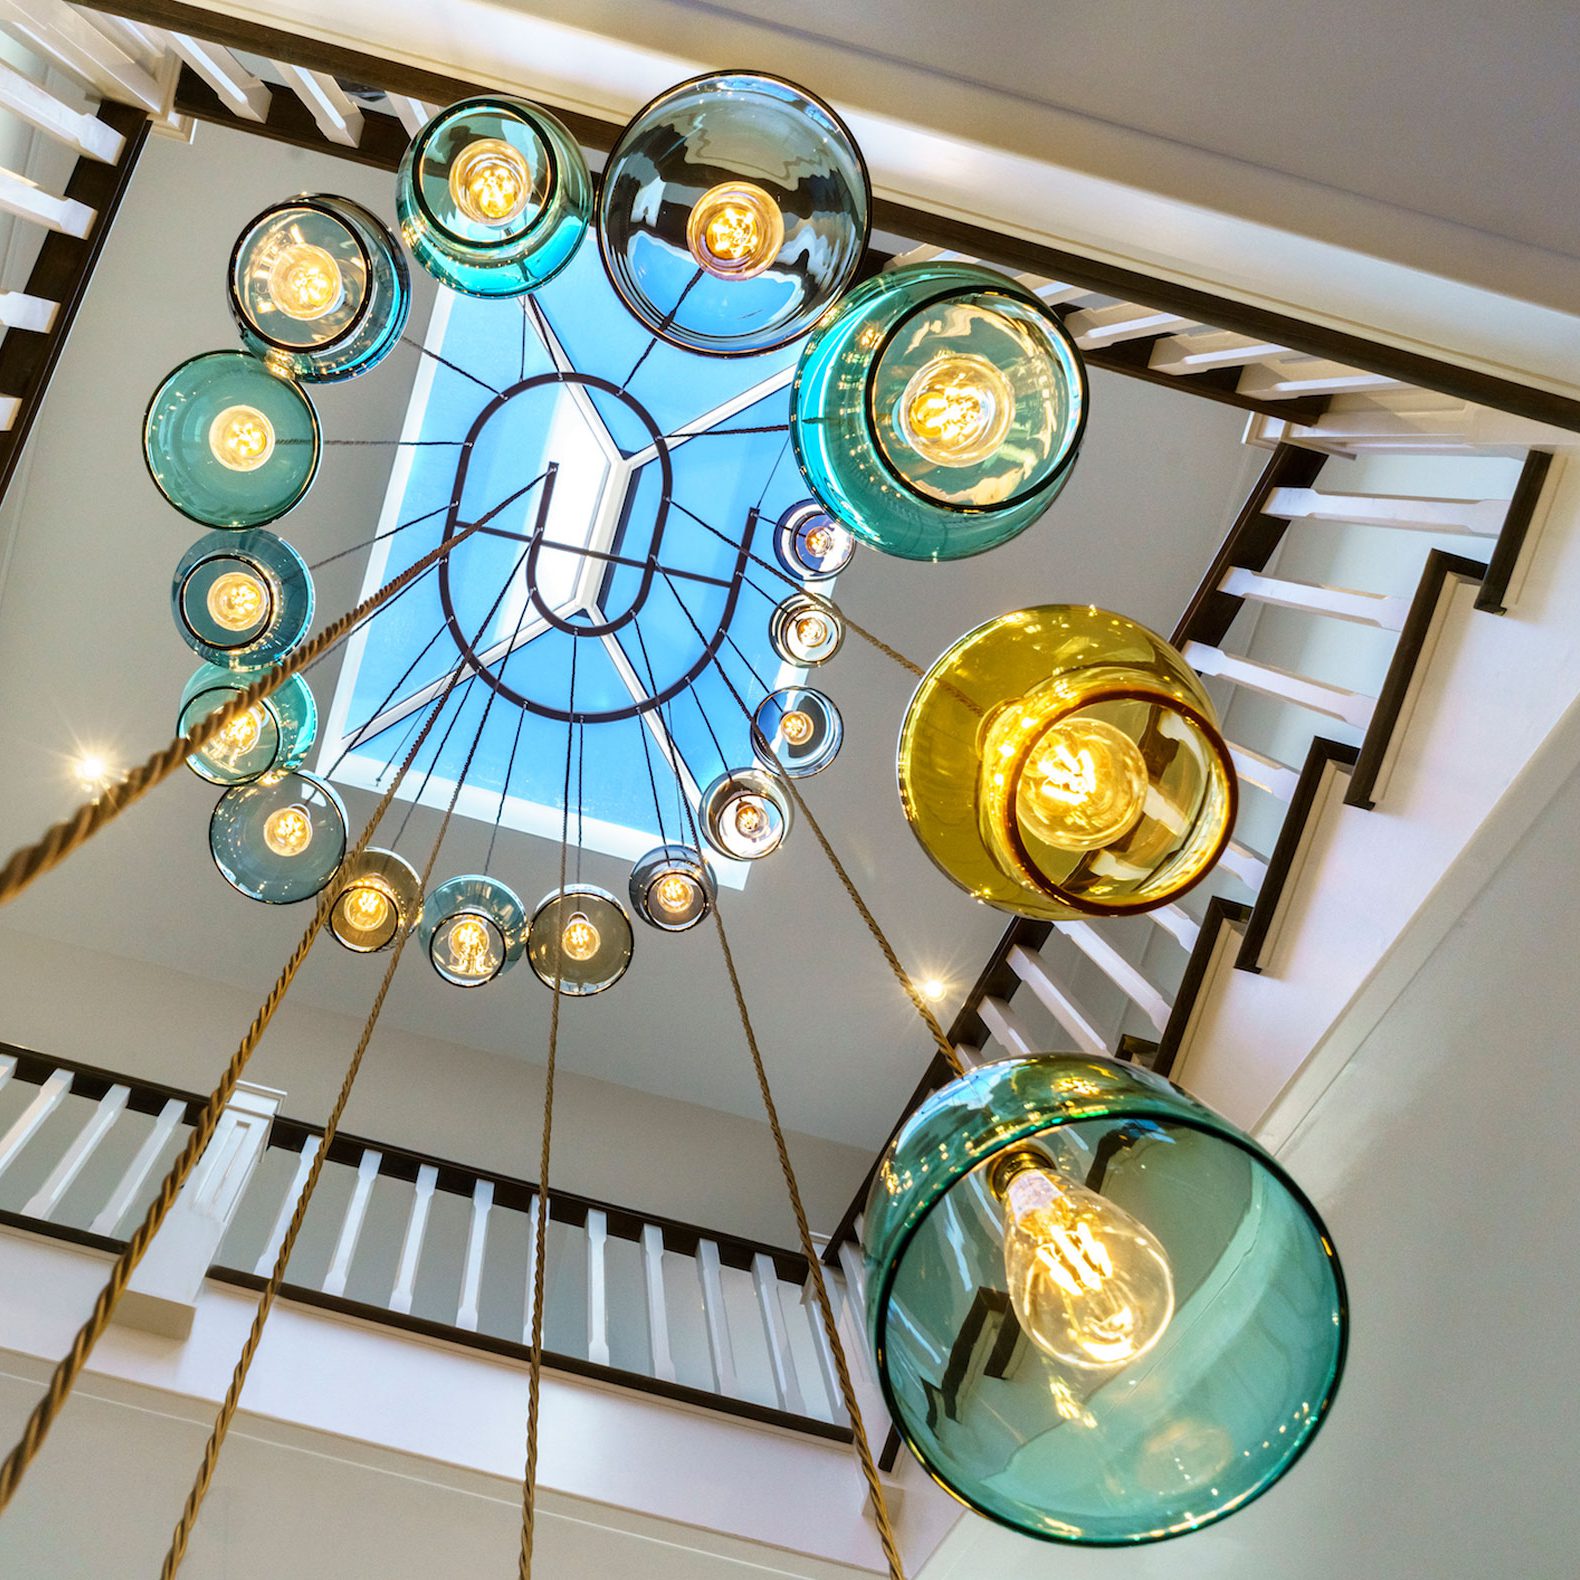 A tall stairwell with handmade spiral pendant made from turquoise and amber hand blown glass.